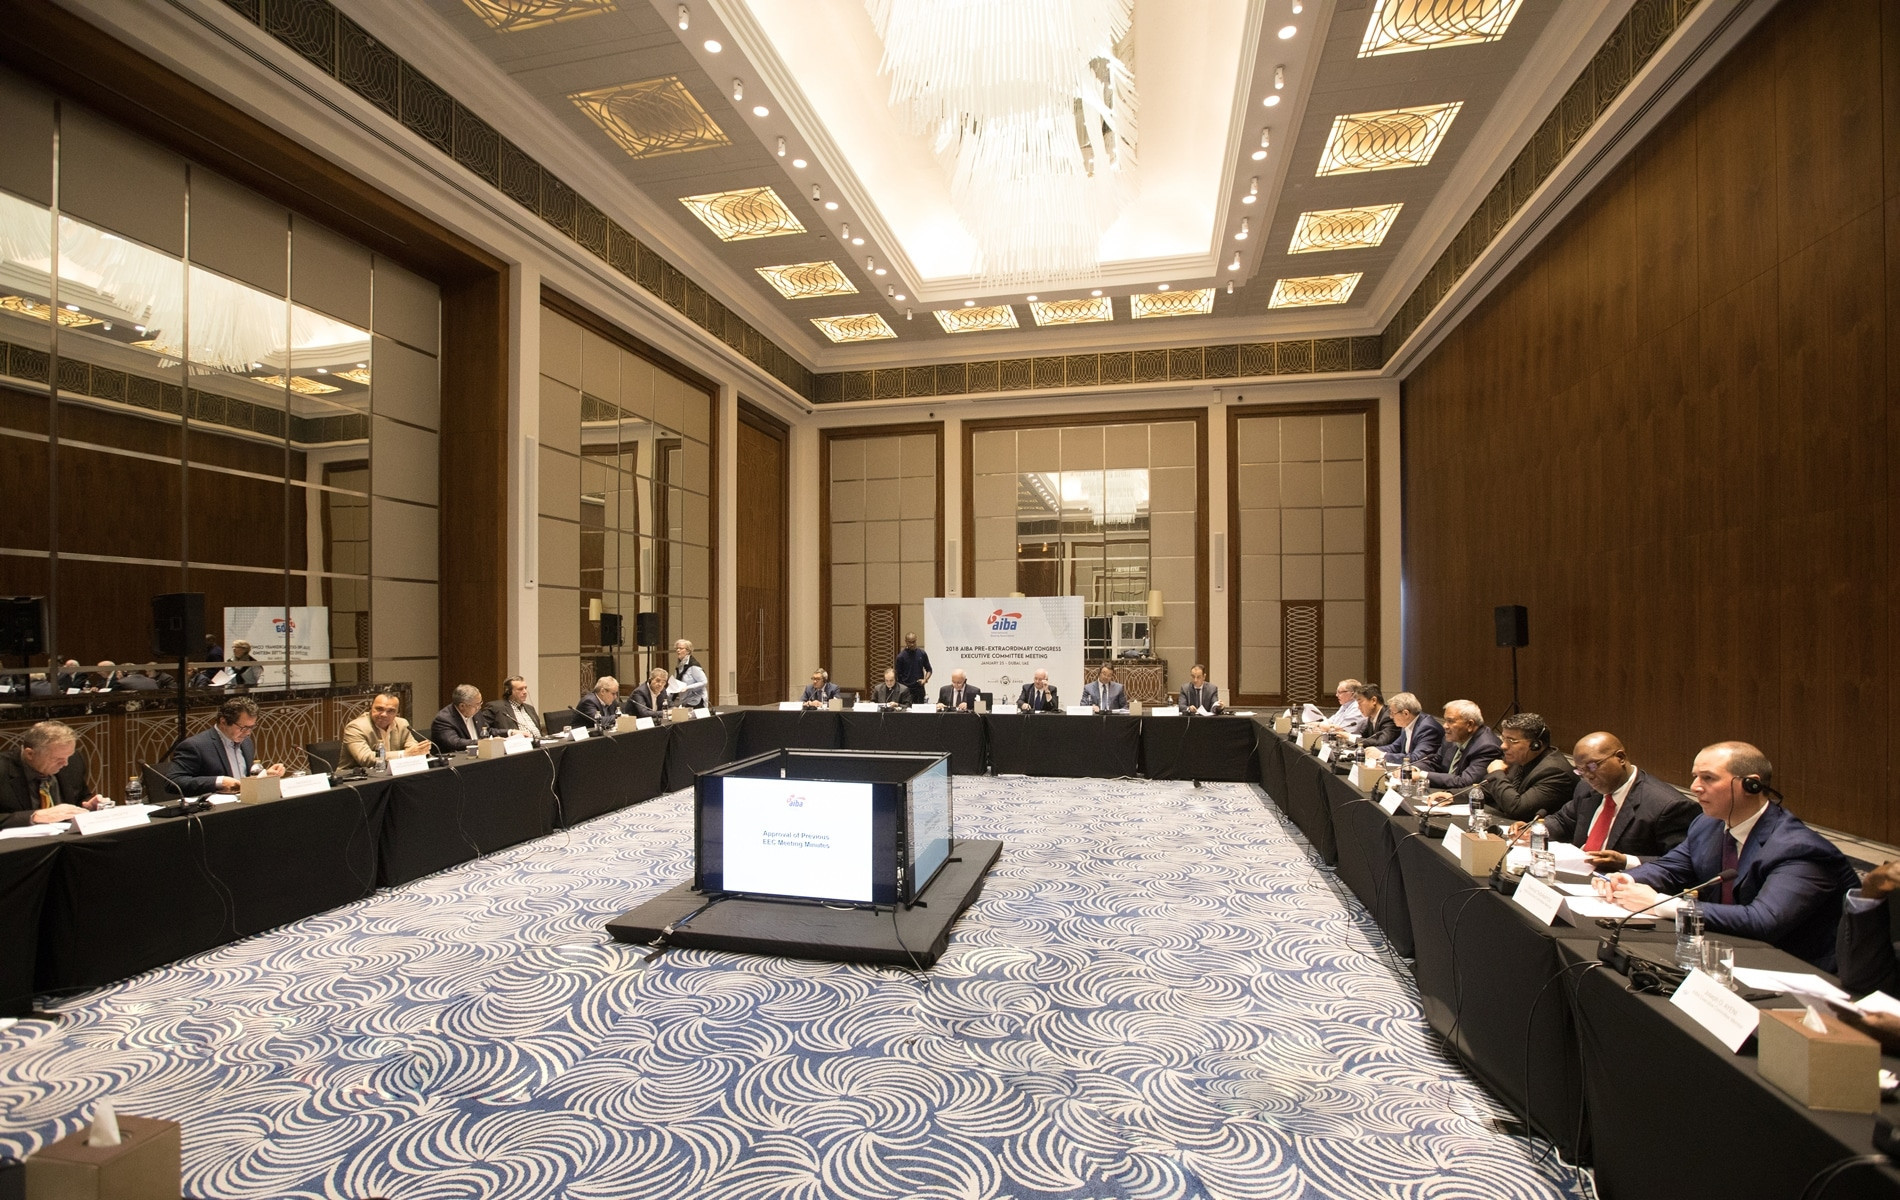 A new Interim President is due to be elected at the meeting in Istanbul ©AIBA